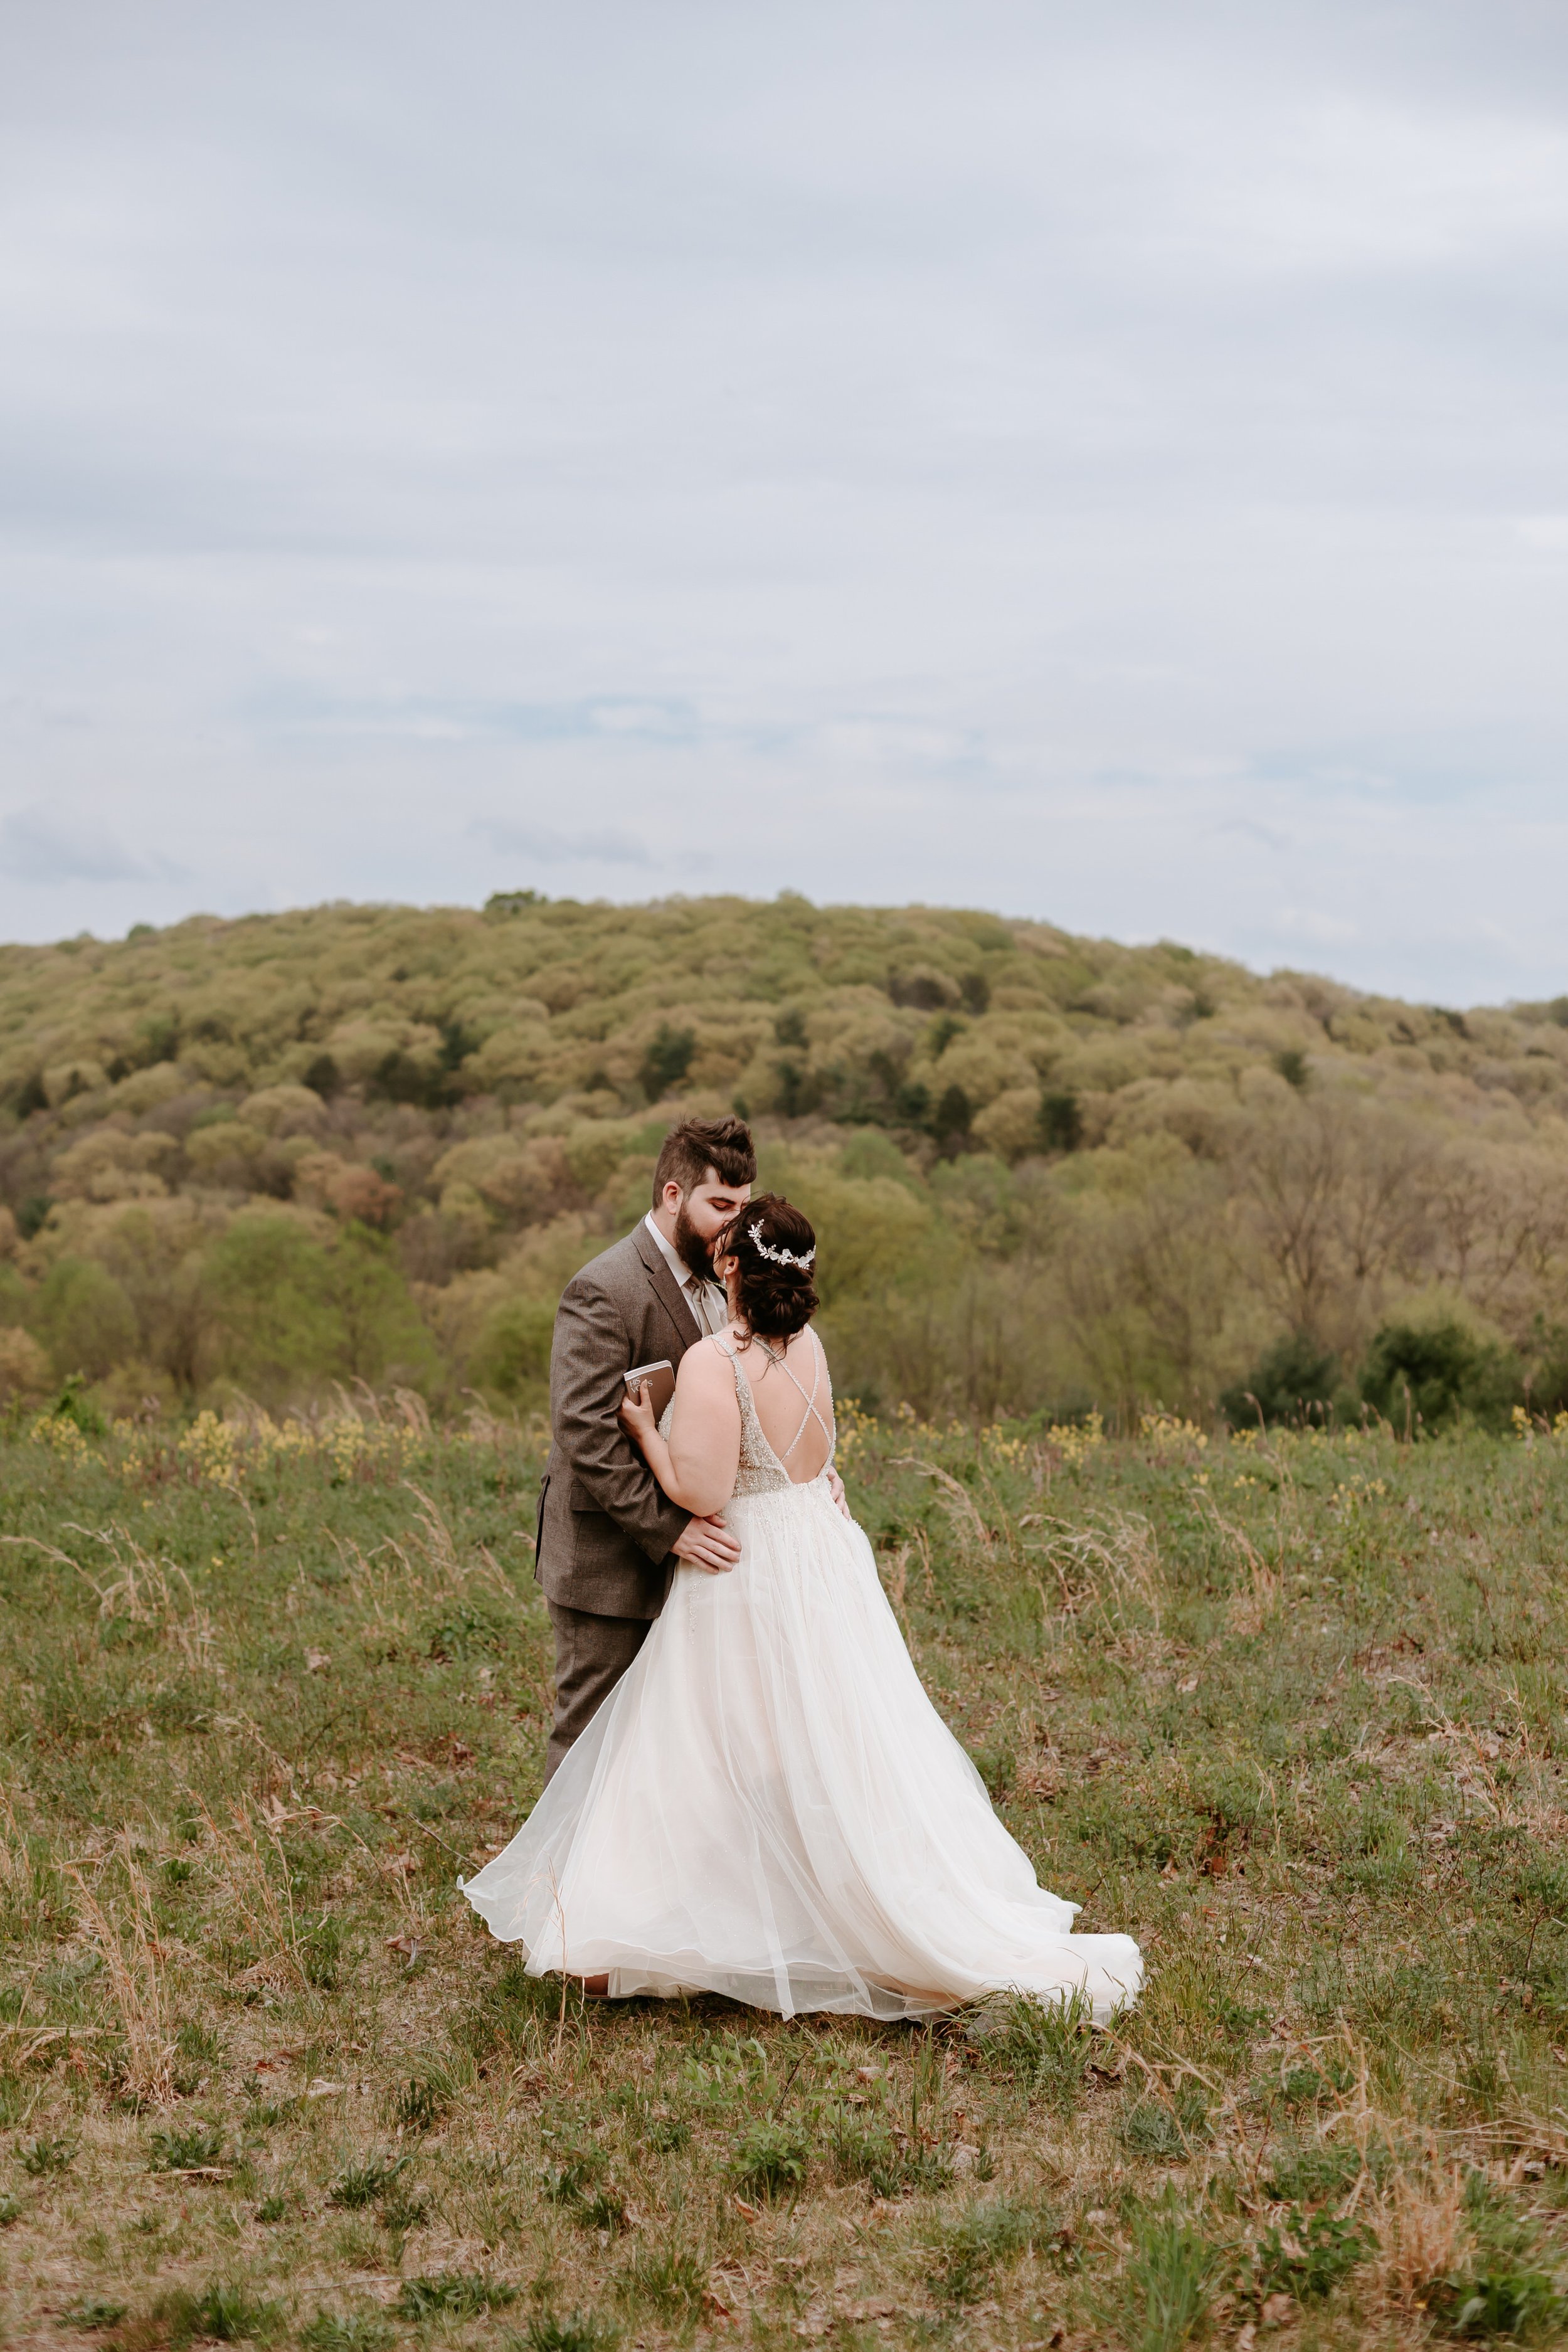 Bride and groom kiss in open landscape.